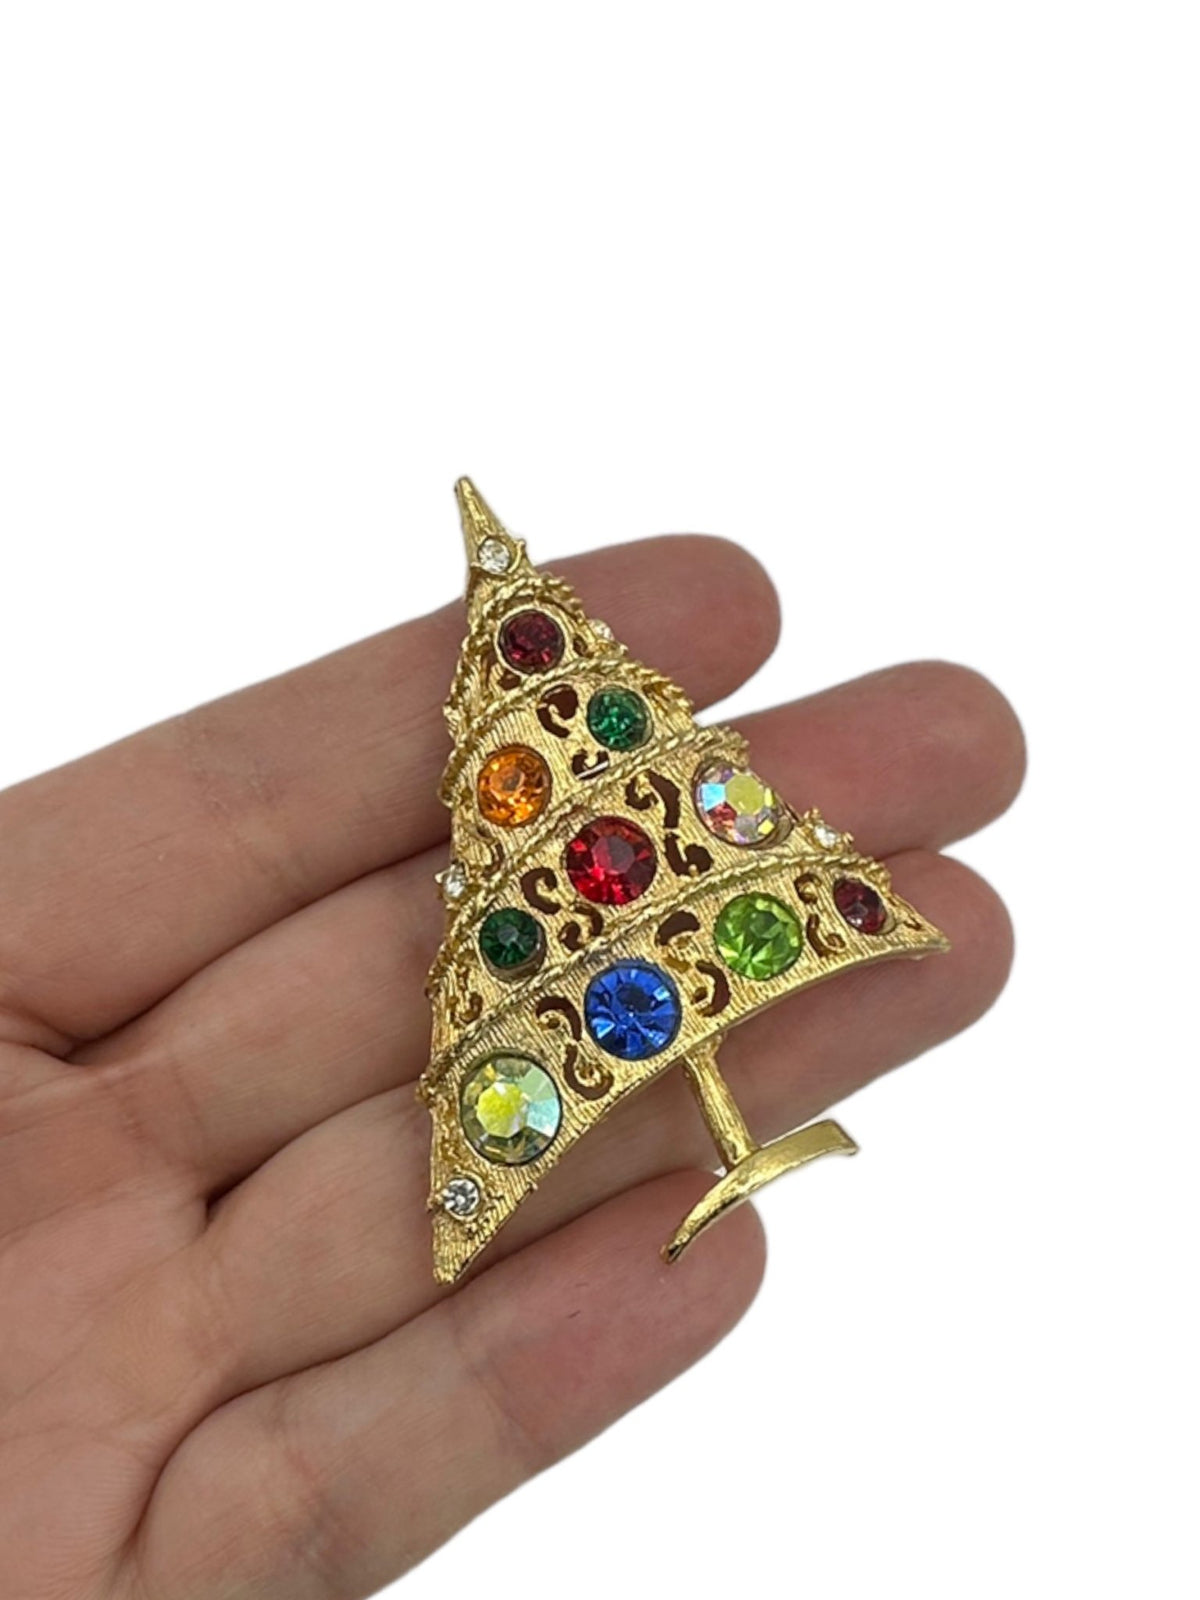 Vintage Weiss Colorful Christmas Tree Brooch - 24 Wishes Vintage Jewelry